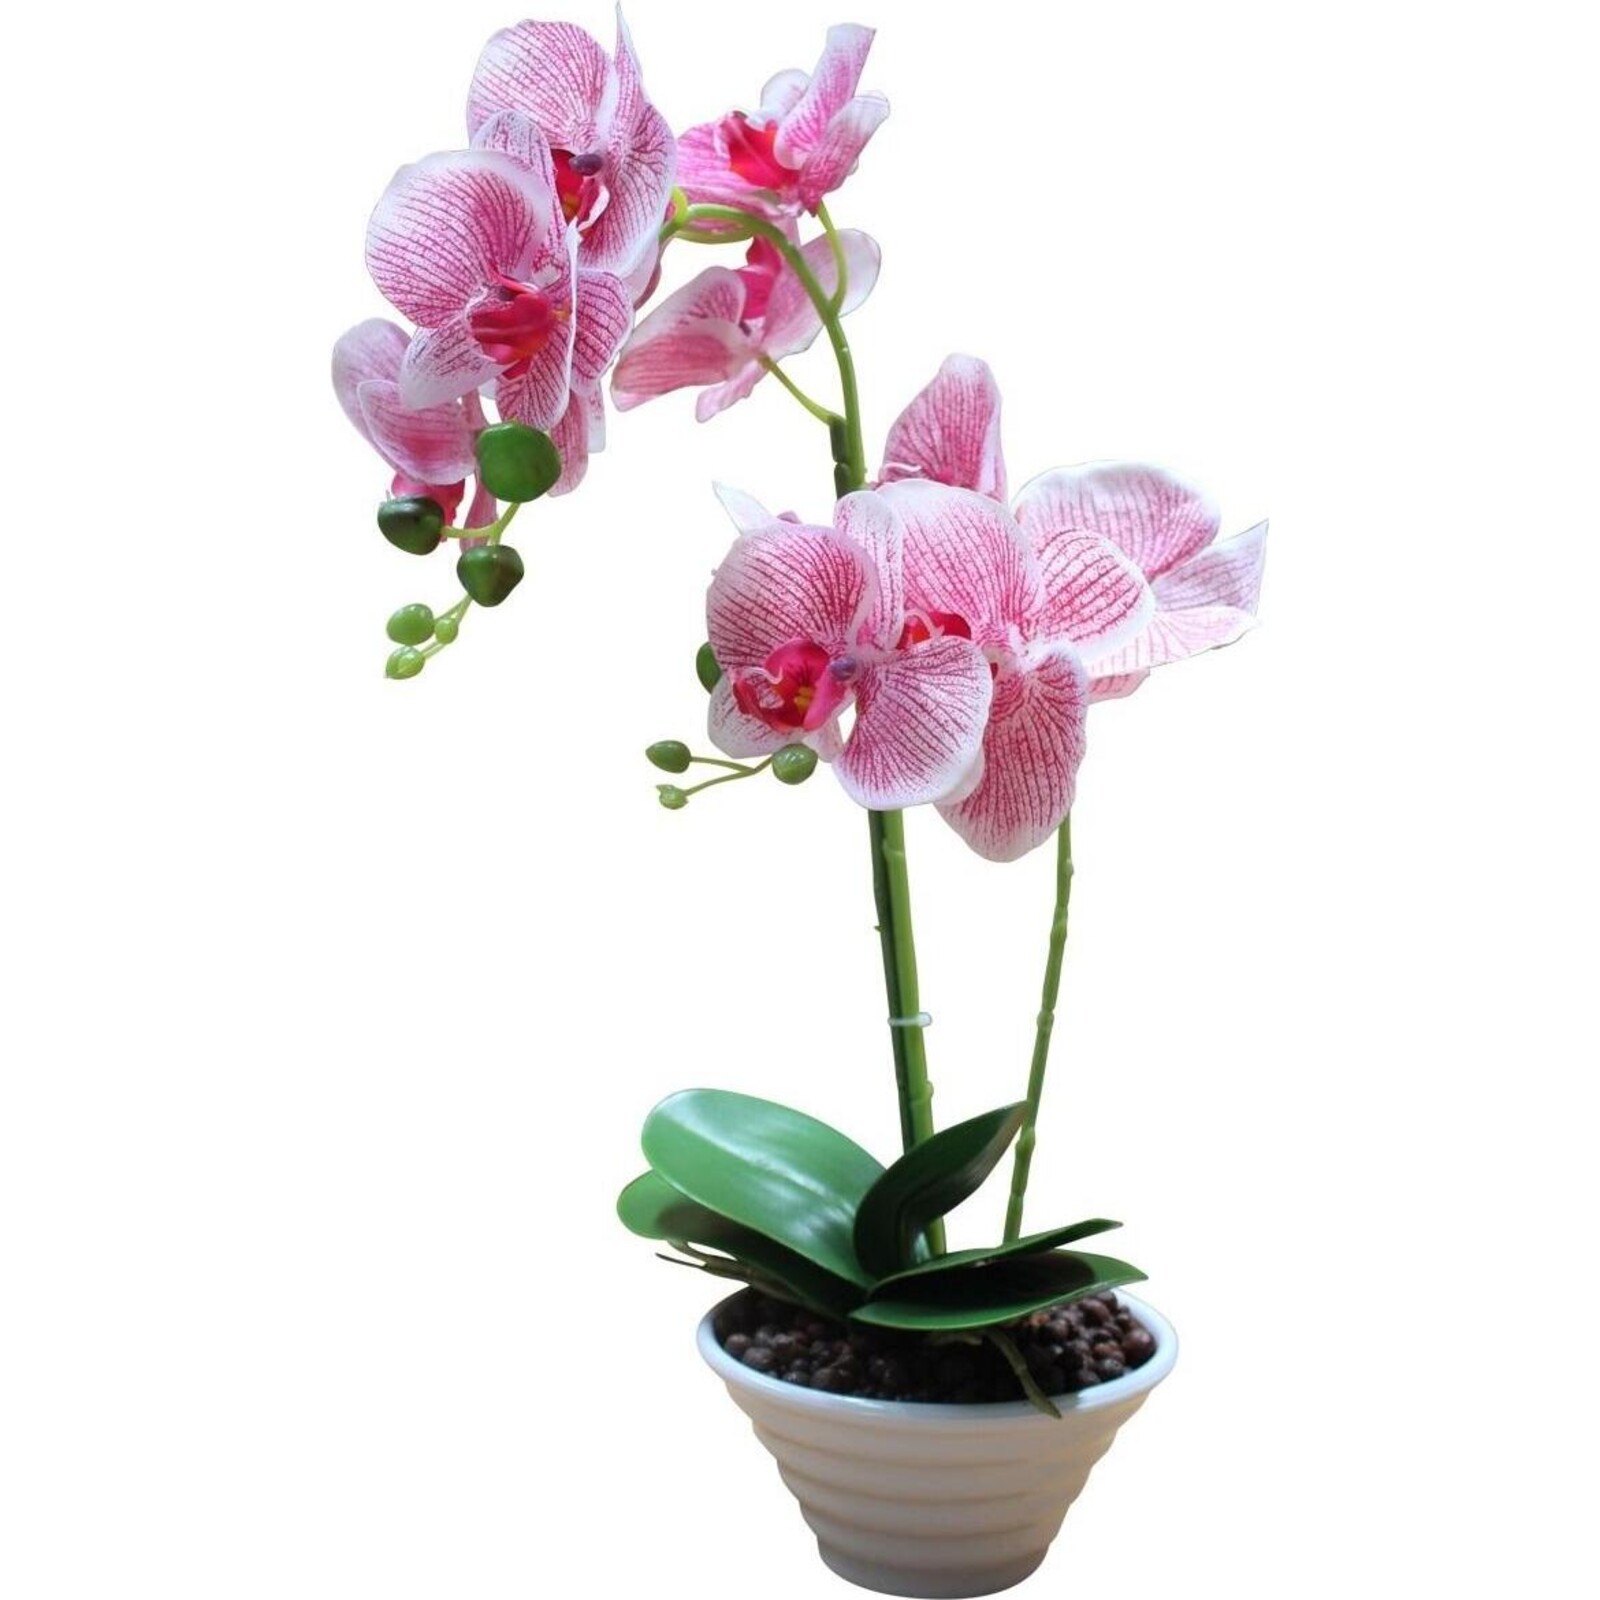 Imitation Orchid Tall Pink